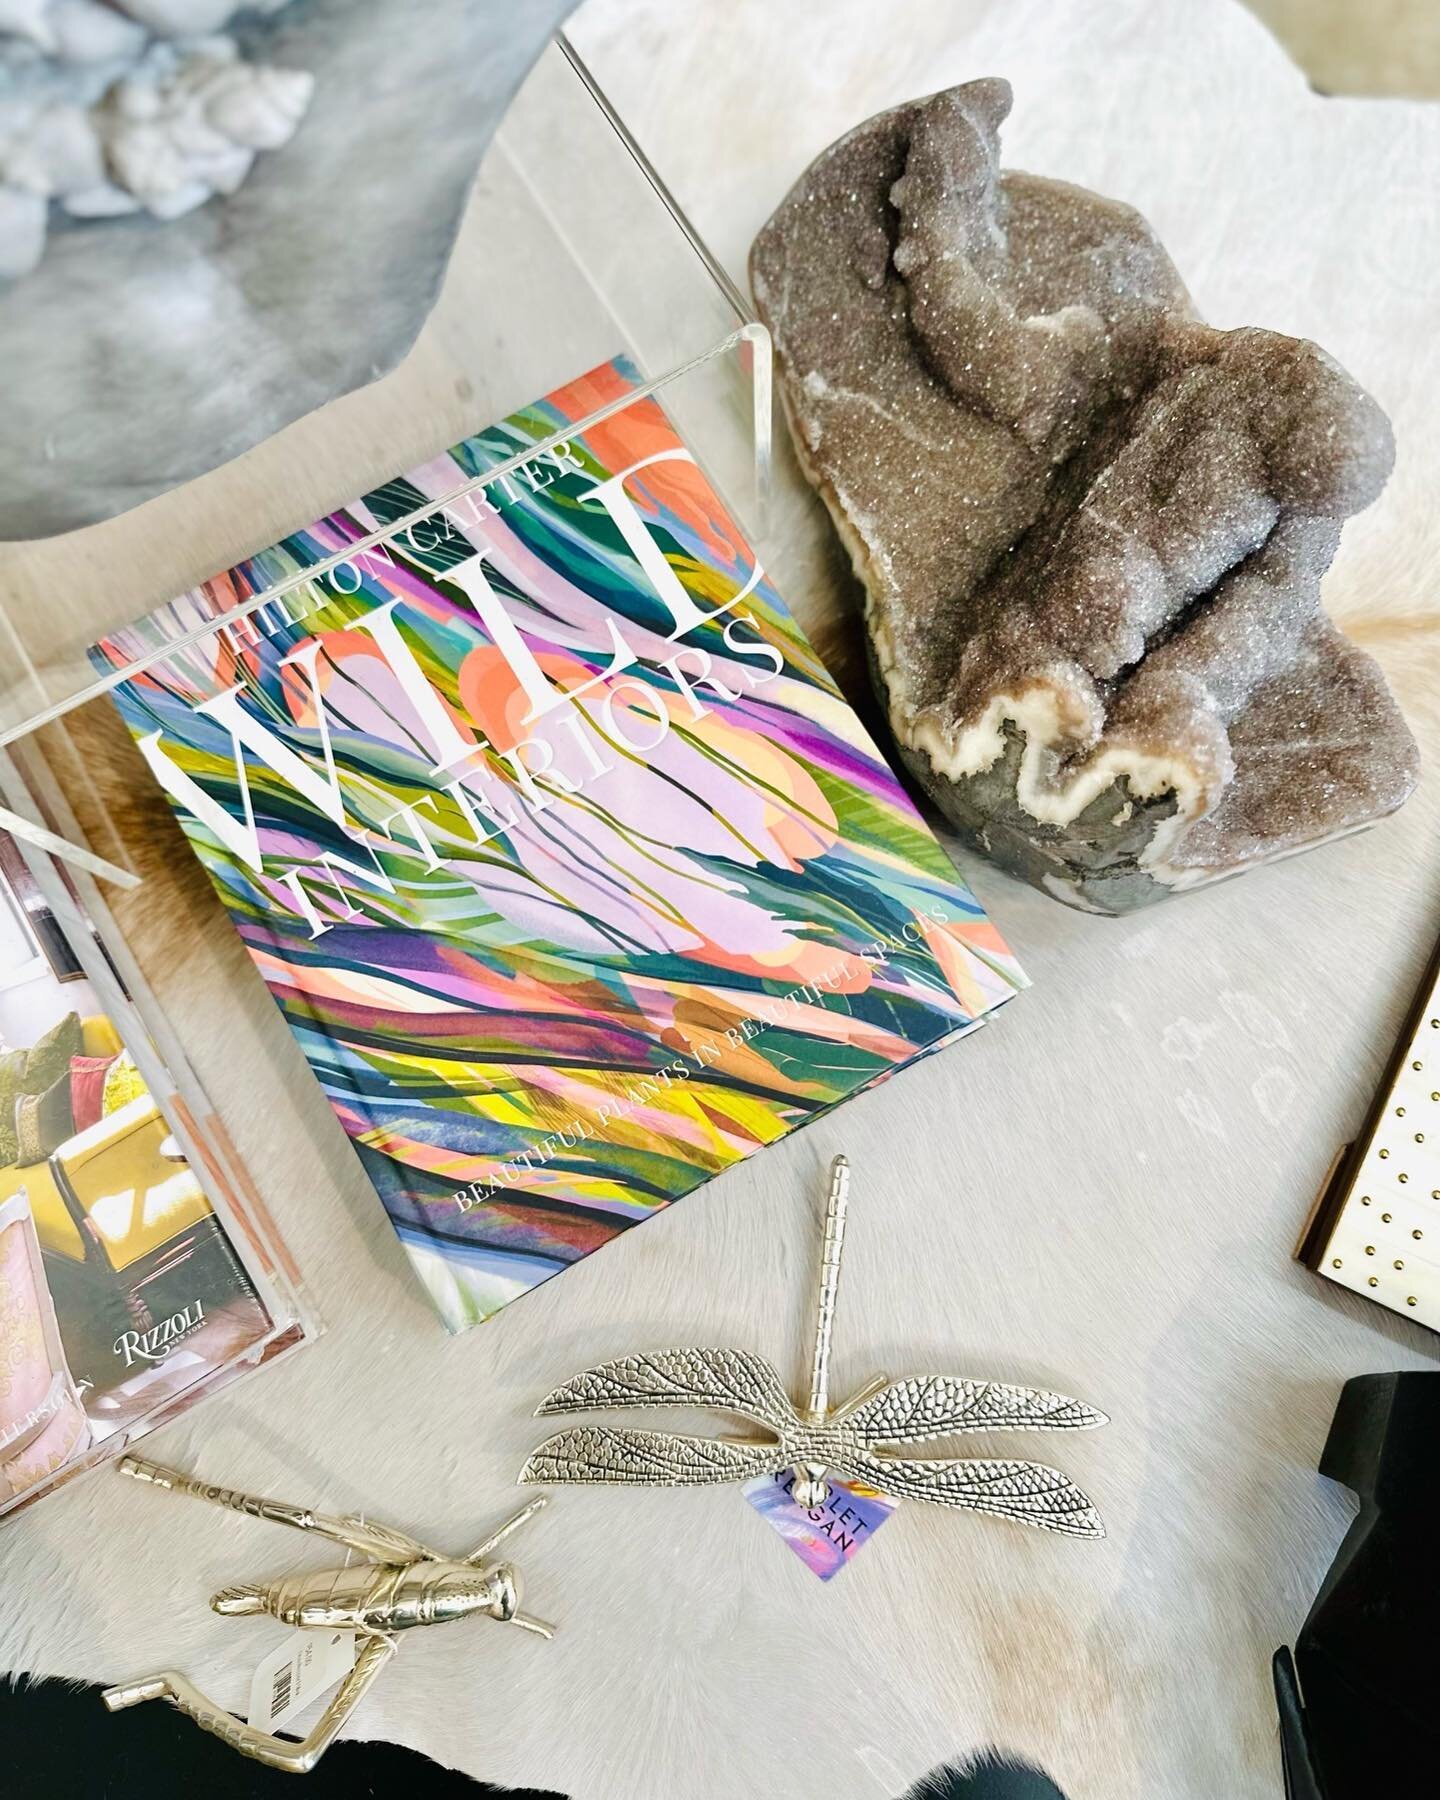 Discover the art of home styling with our curated collection of table books. Let your coffee table tell a story. ✨

#homedecoritems #dallas #dallasdecor #dallasdecorators #dallasdecorator #dallasbusiness #dallasbusinesswomen #dallasbusinessowners #da